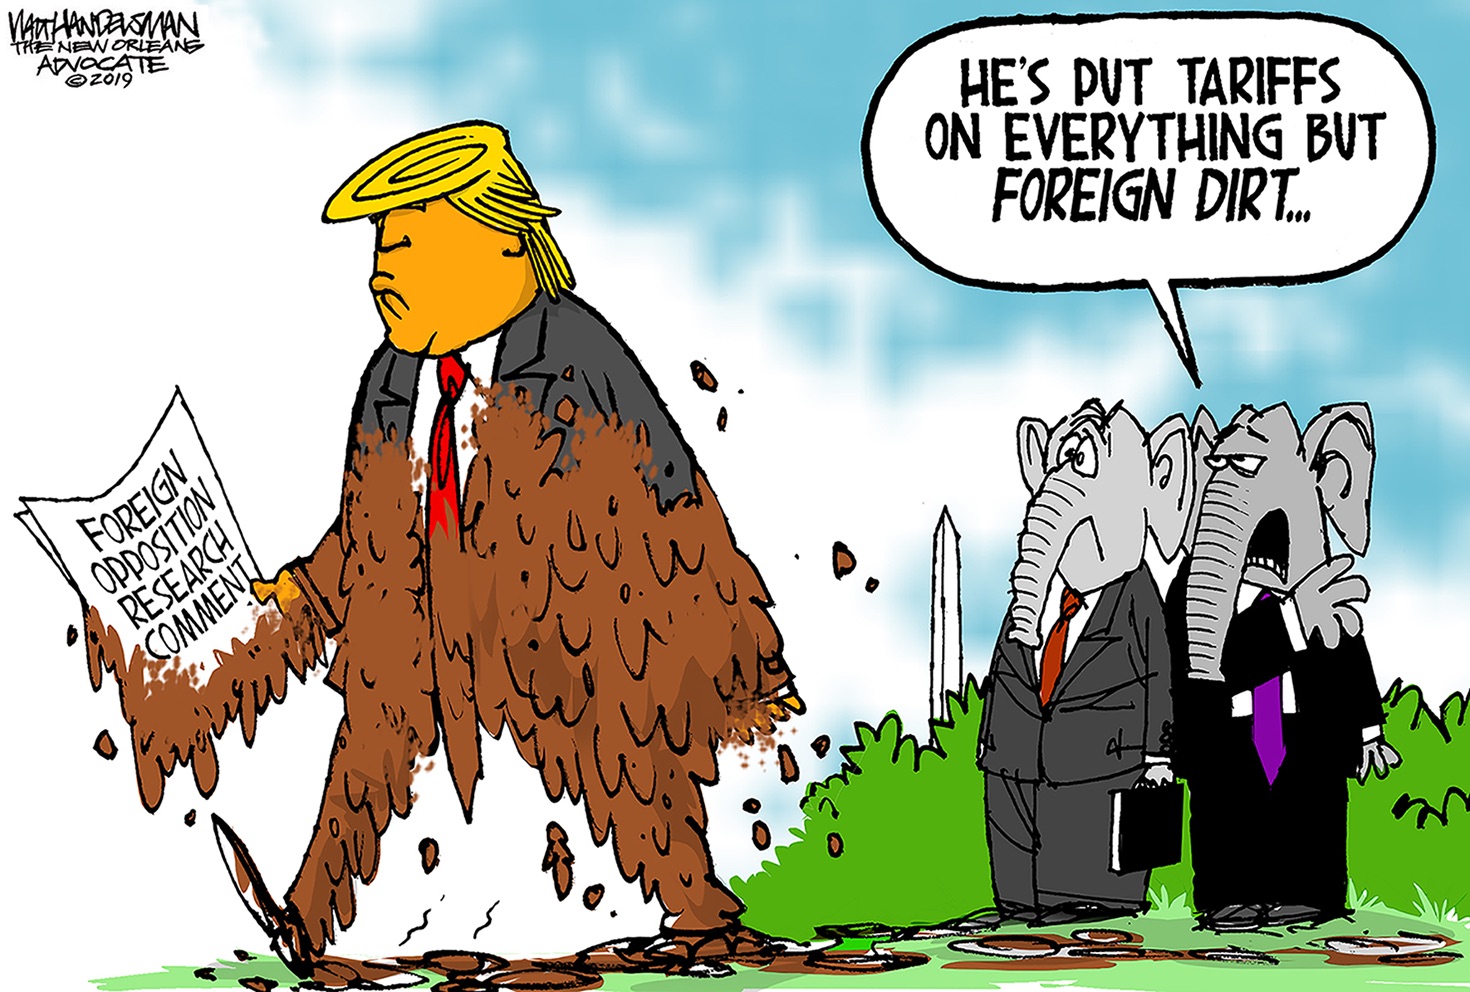 7 scathingly funny cartoons about Trump's 'foreign dirt' comment | The Week